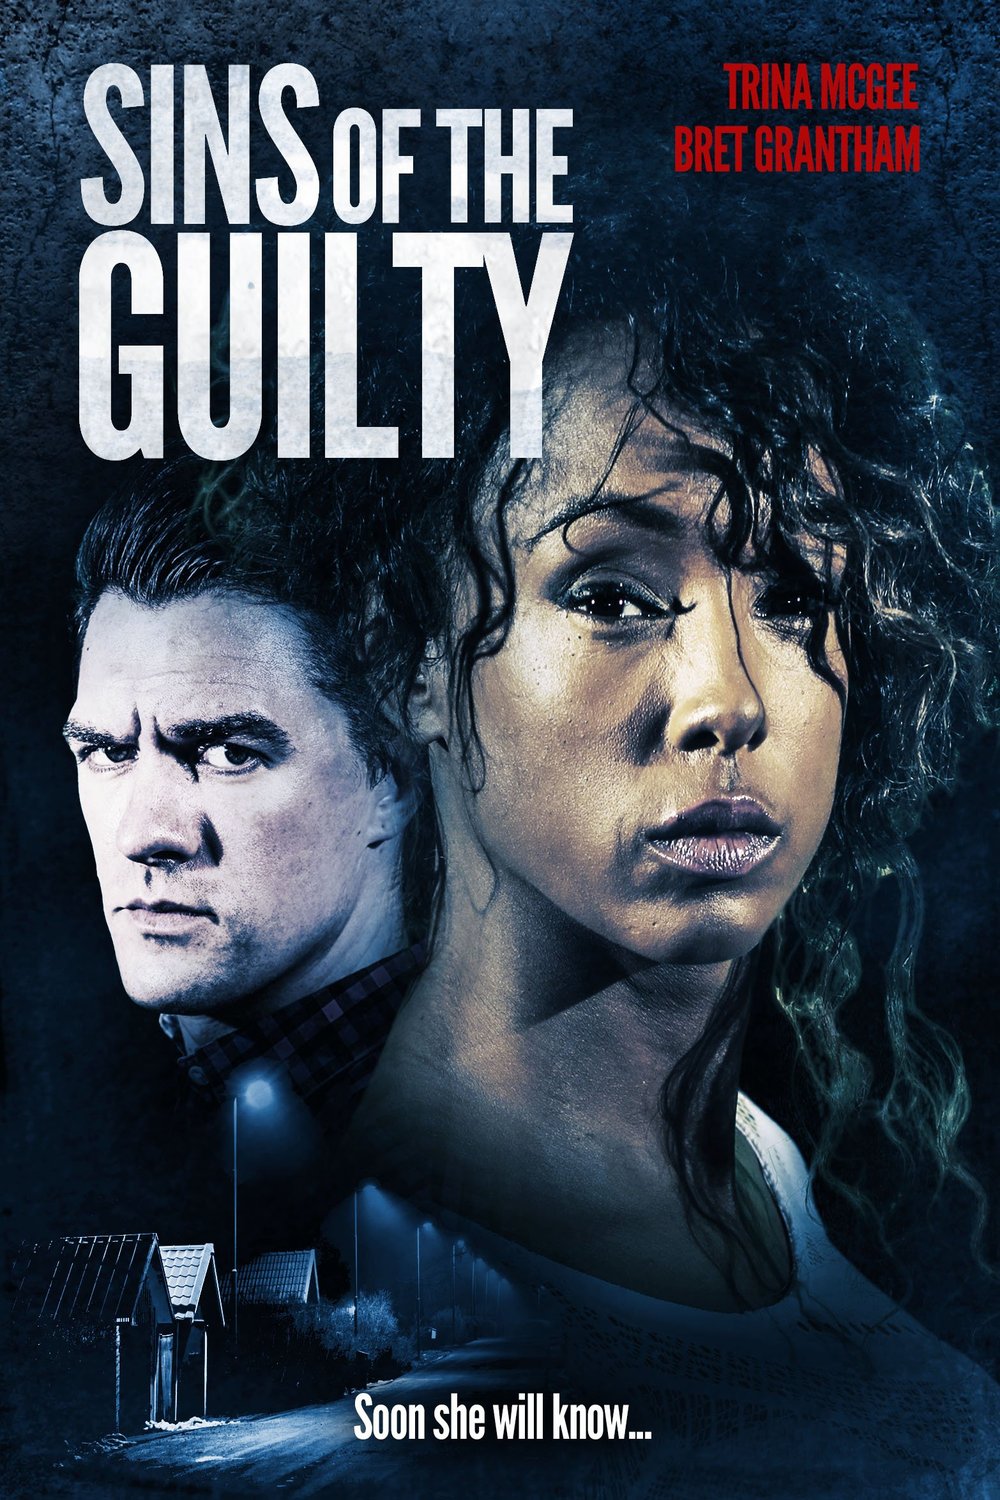 Poster of the movie Sins of the Guilty